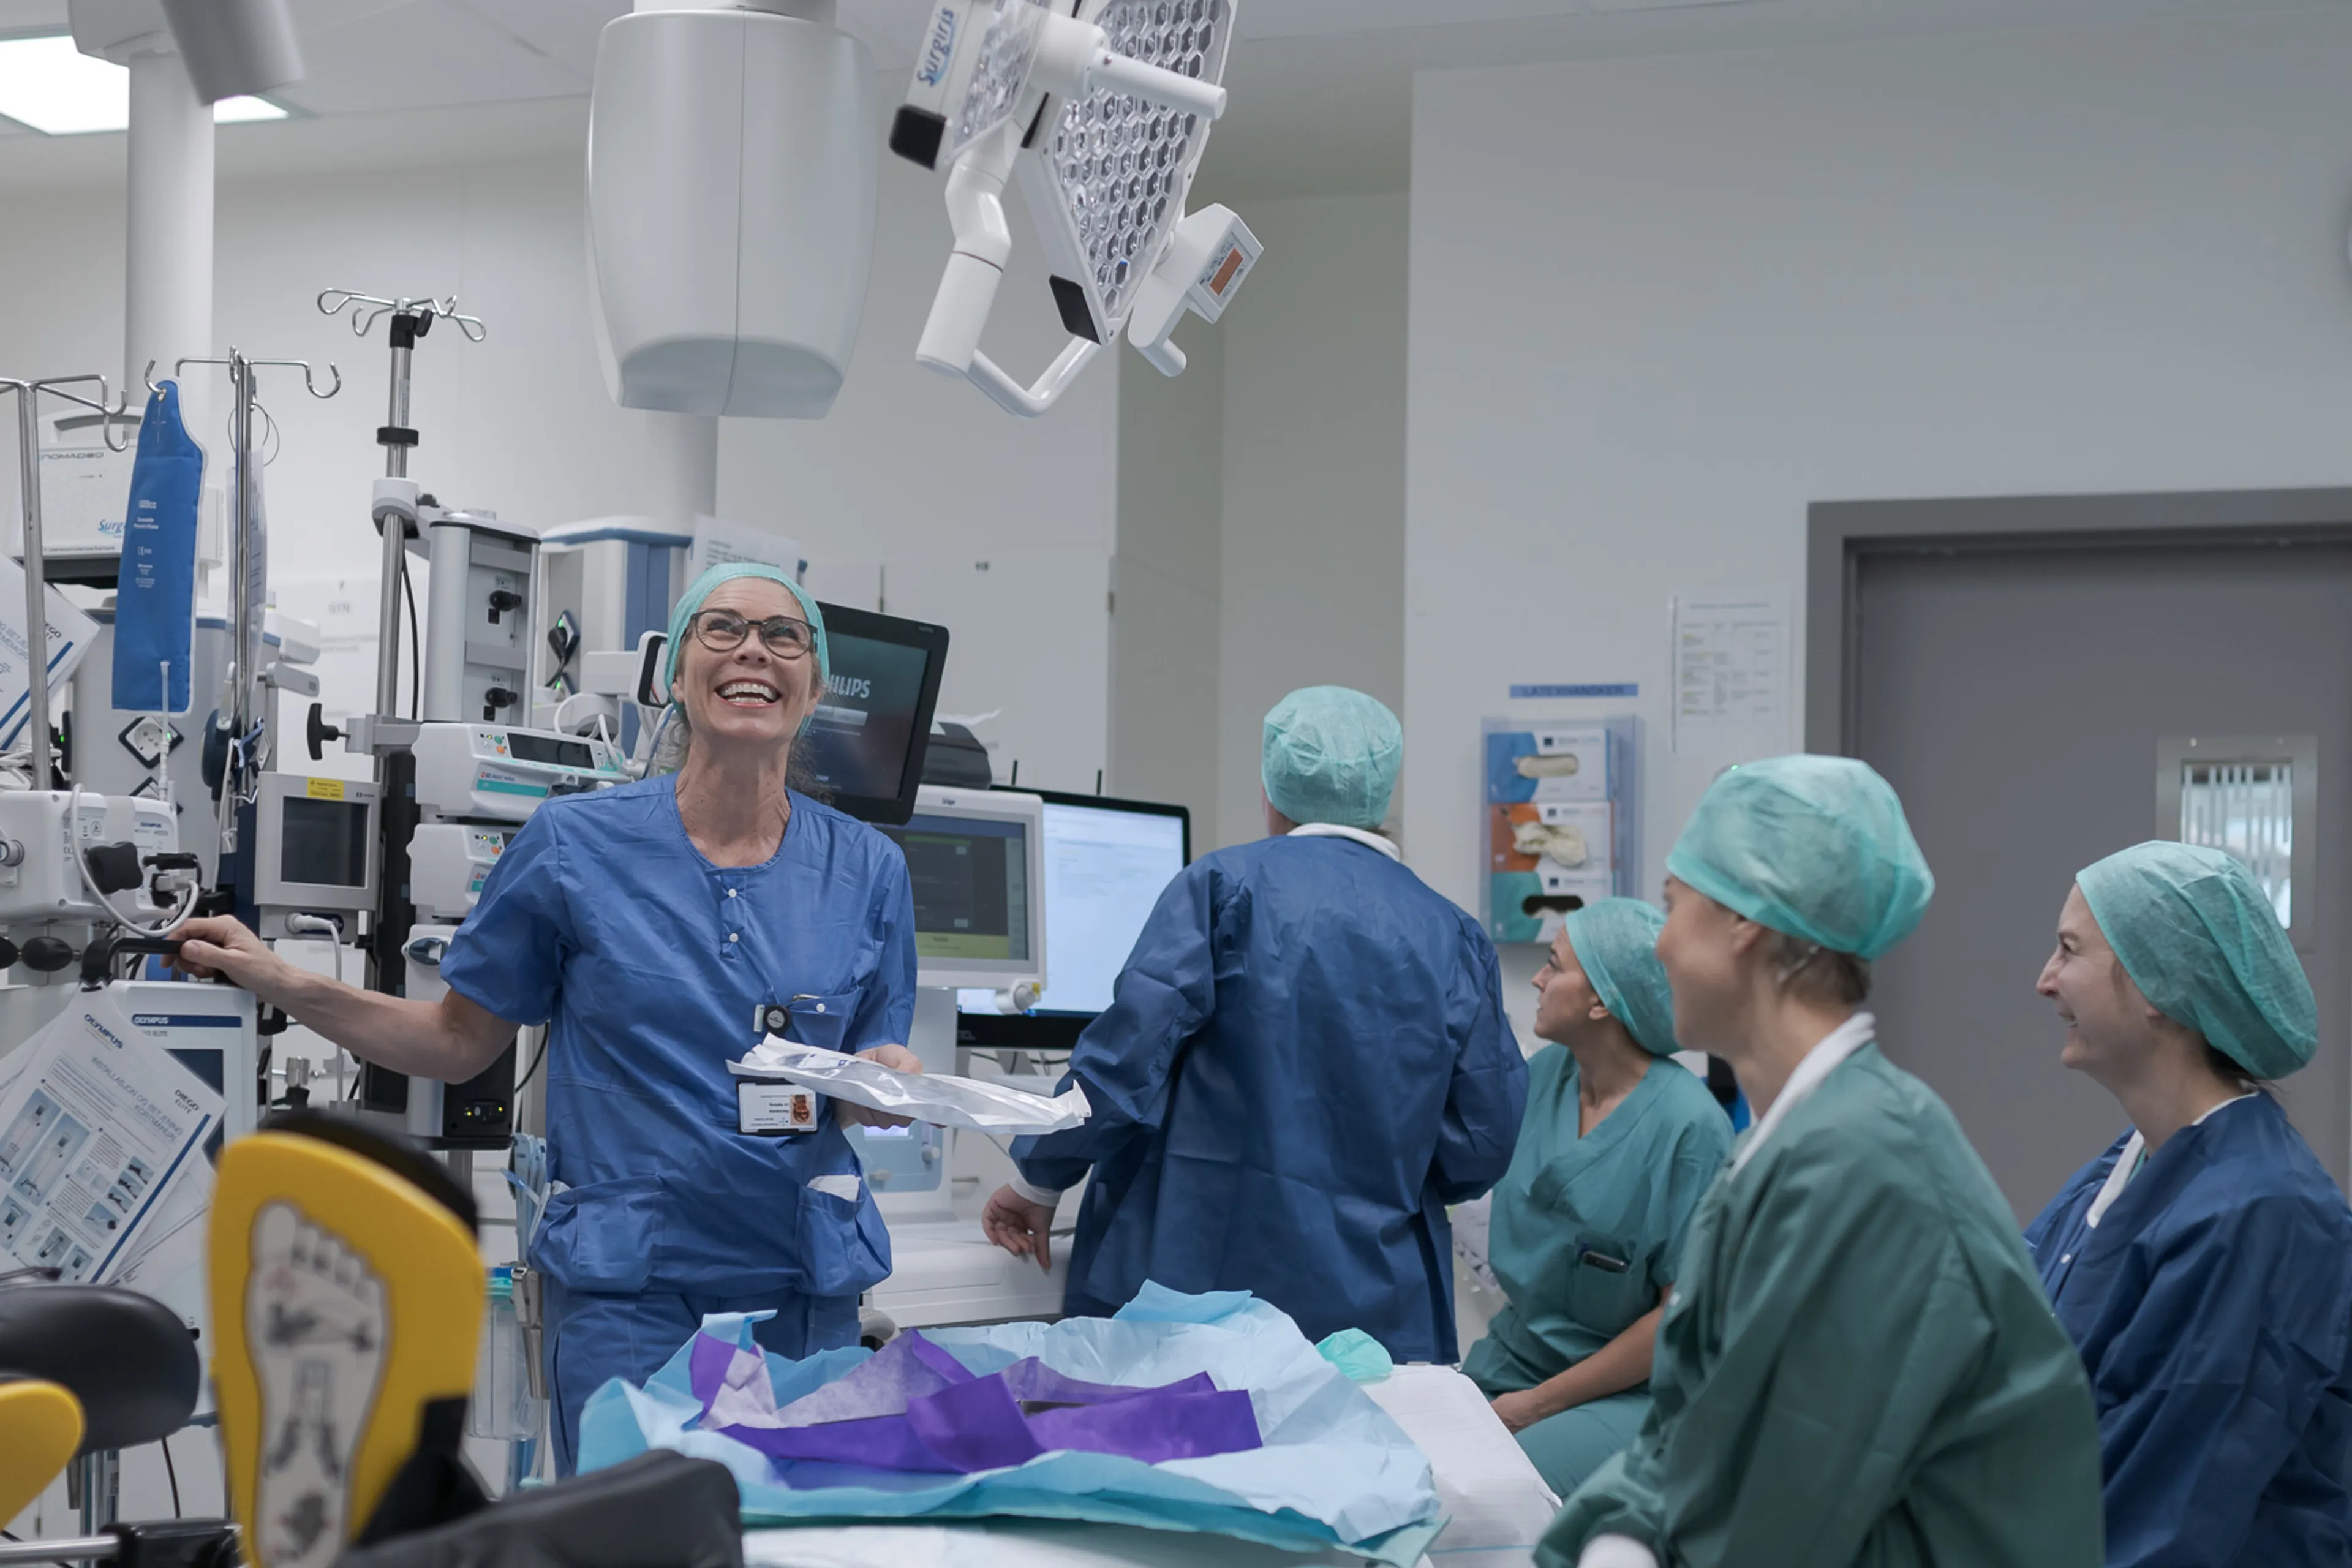 A group of people in surgical scrubs in a room